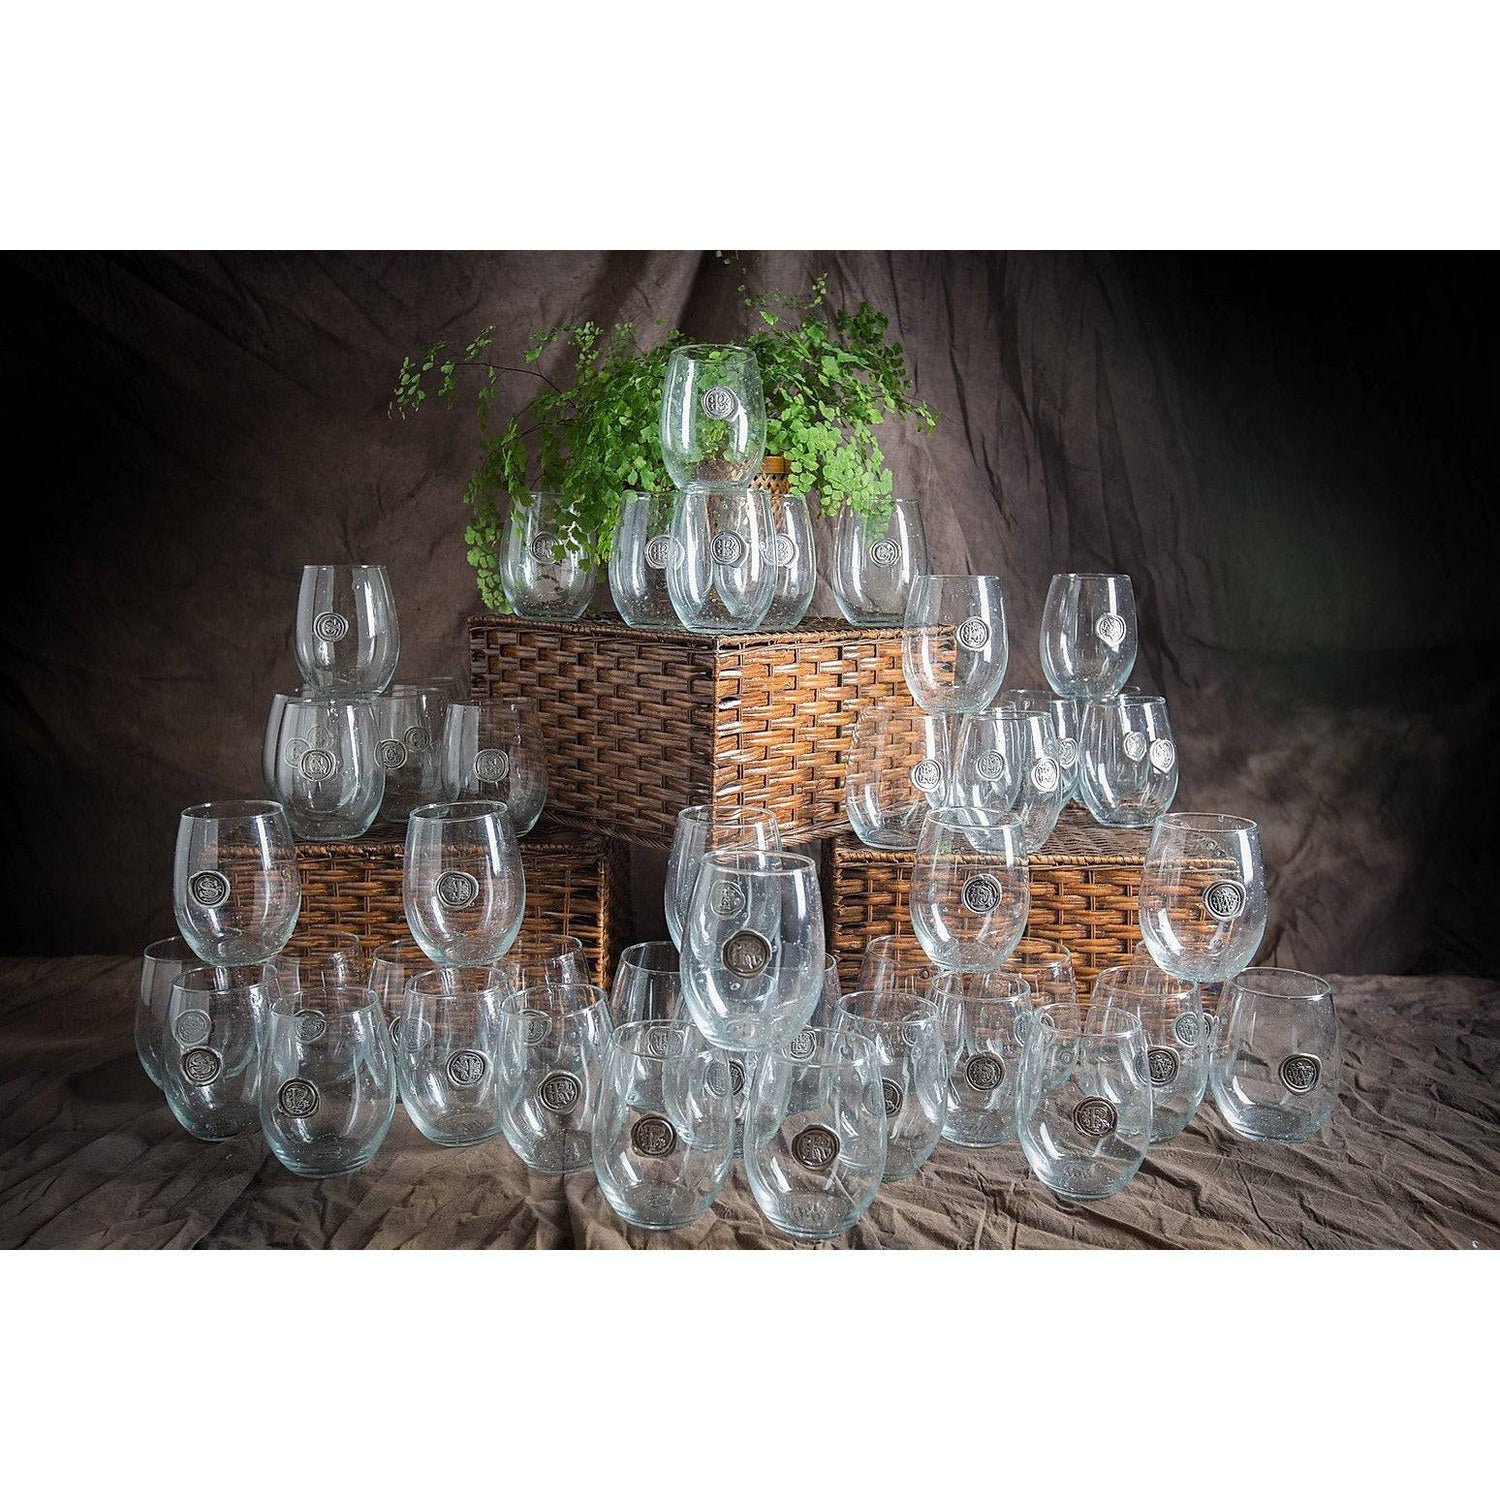 INITIAL STEMLESS WINE GLASS - Findlay Rowe Designs